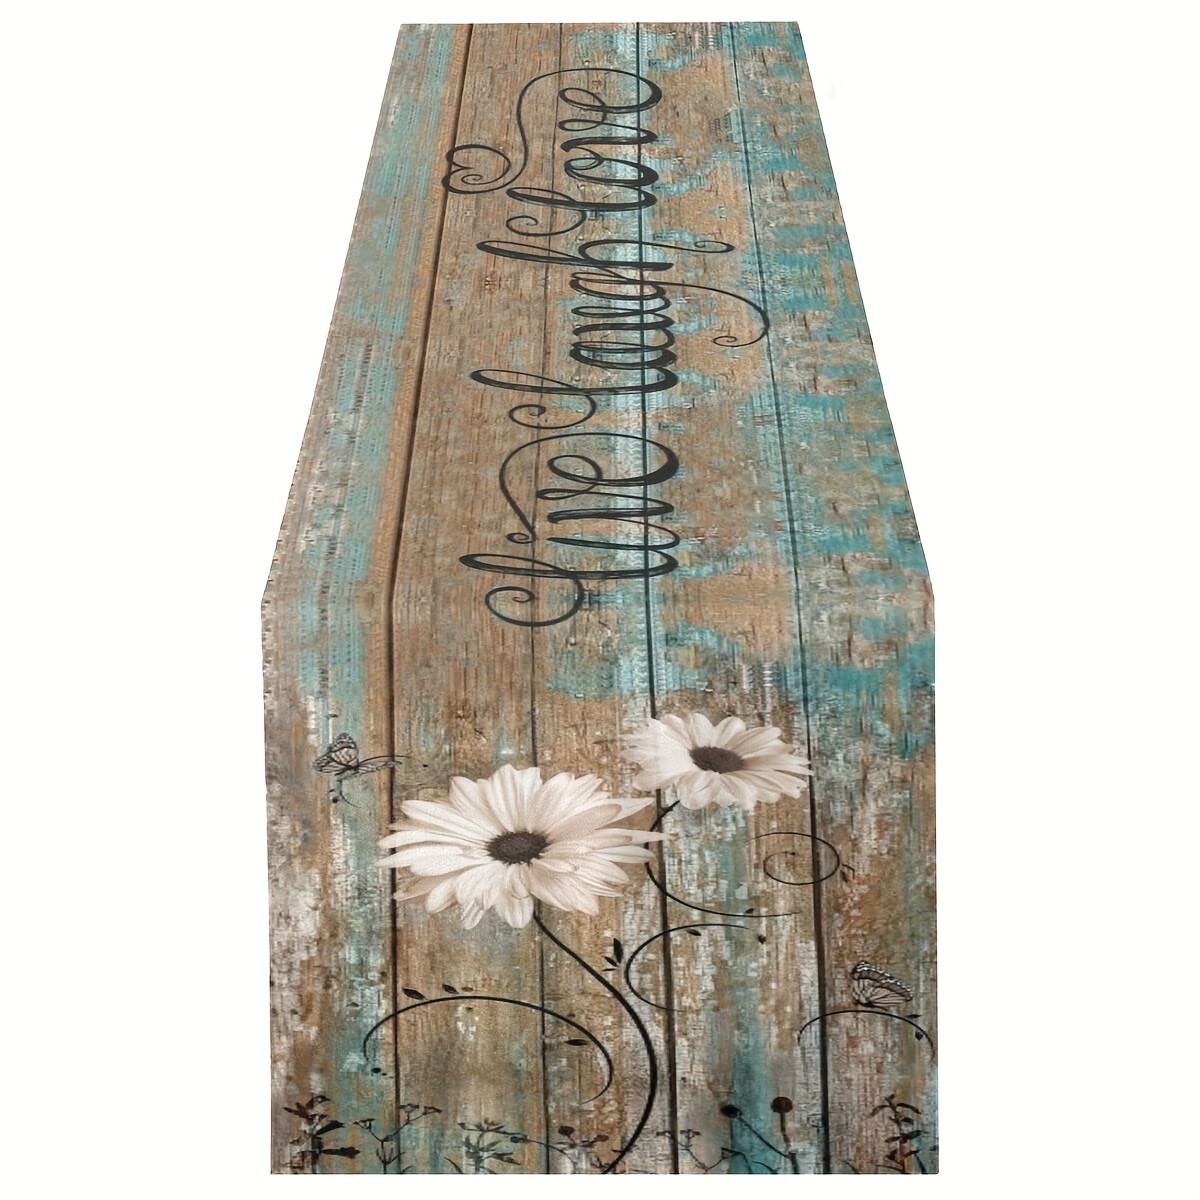 

1pc, Polyester Table Runner, Rustic Daisy Flower Vintage Sunflower Design, "live Laugh Love" Wood Board Print, Farmhouse Decorative Dresser Scarf, Ideal For Tabletop Dining & Kitchen Party Decor